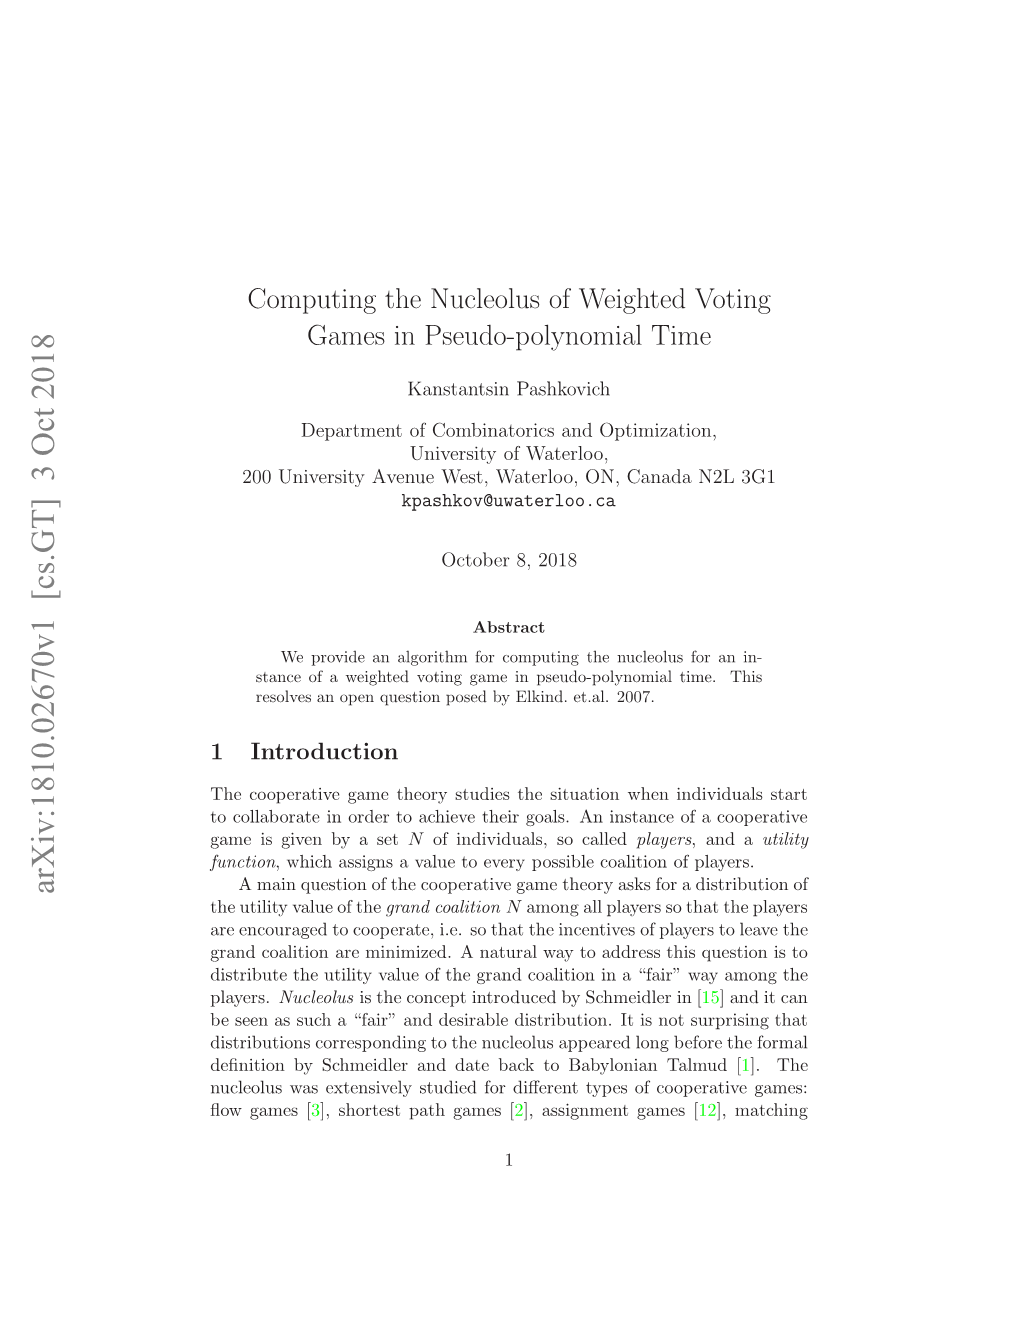 Computing the Nucleolus of Weighted Voting Games in Pseudo-Polynomial Time